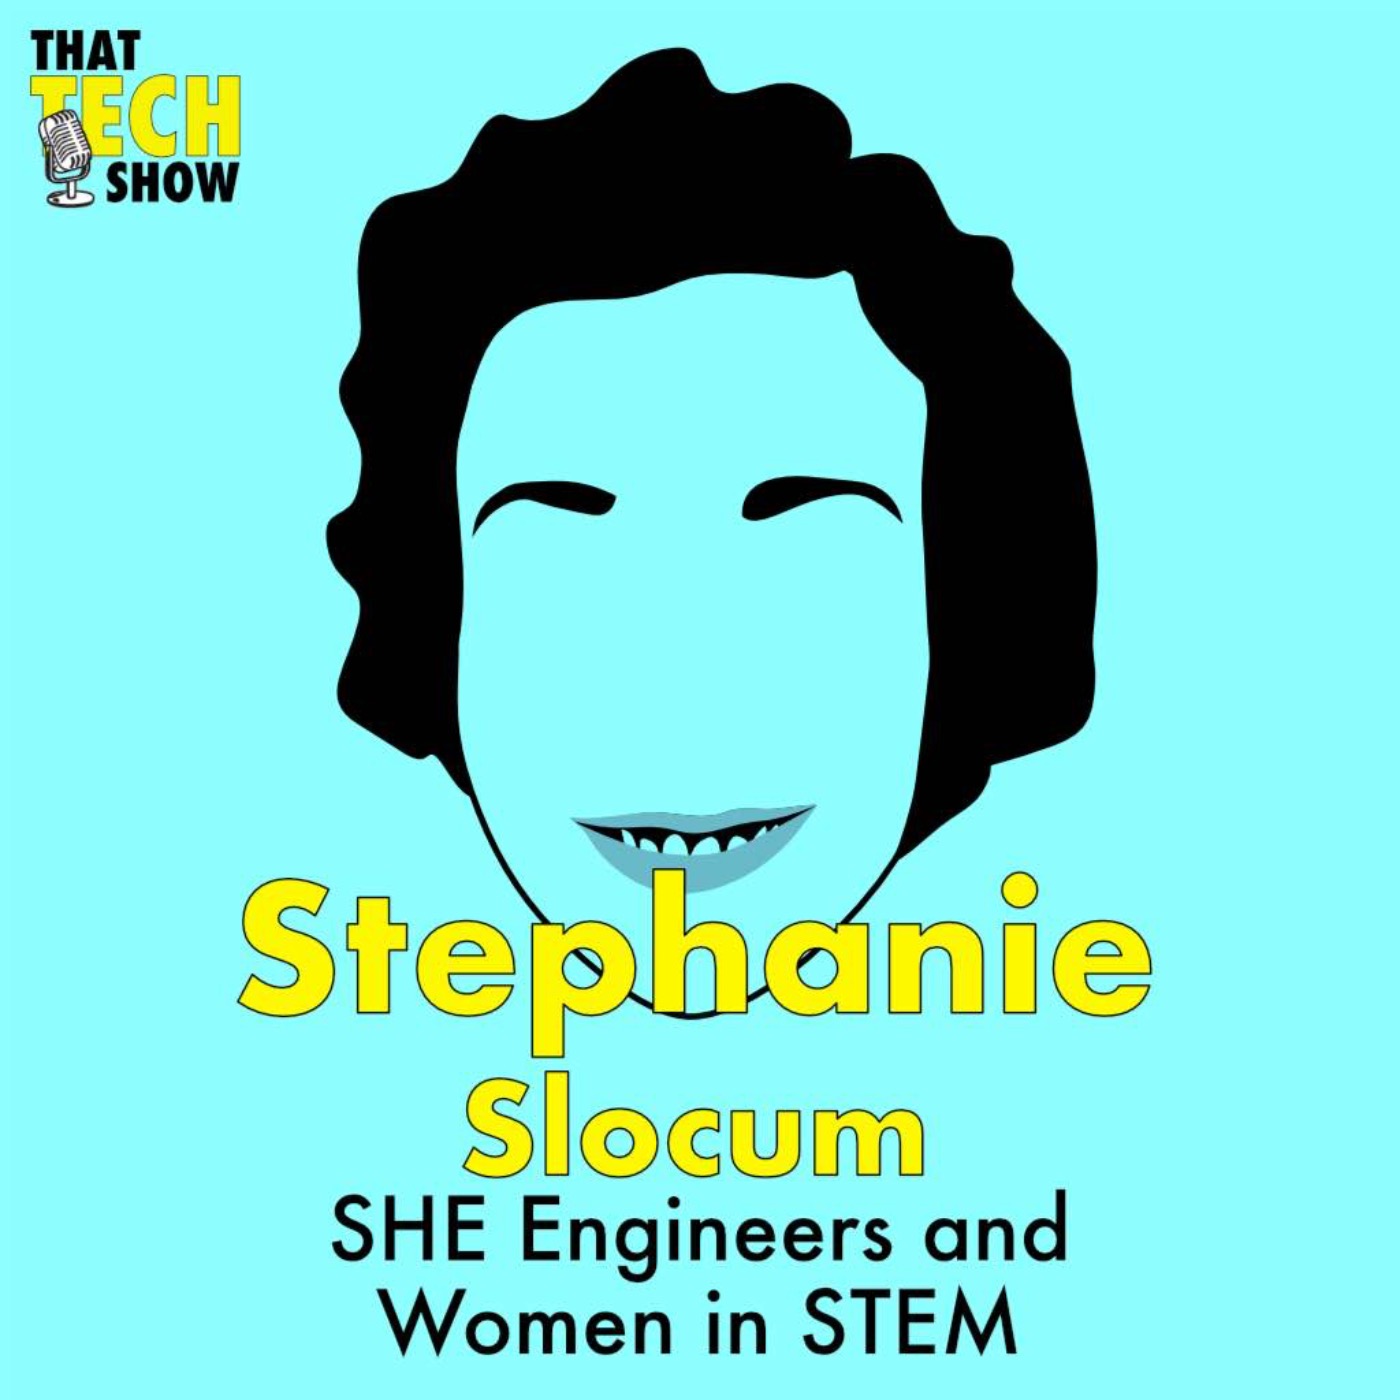 Episode 44 - SHE Engineers and Women in STEM with Stephanie Slocum